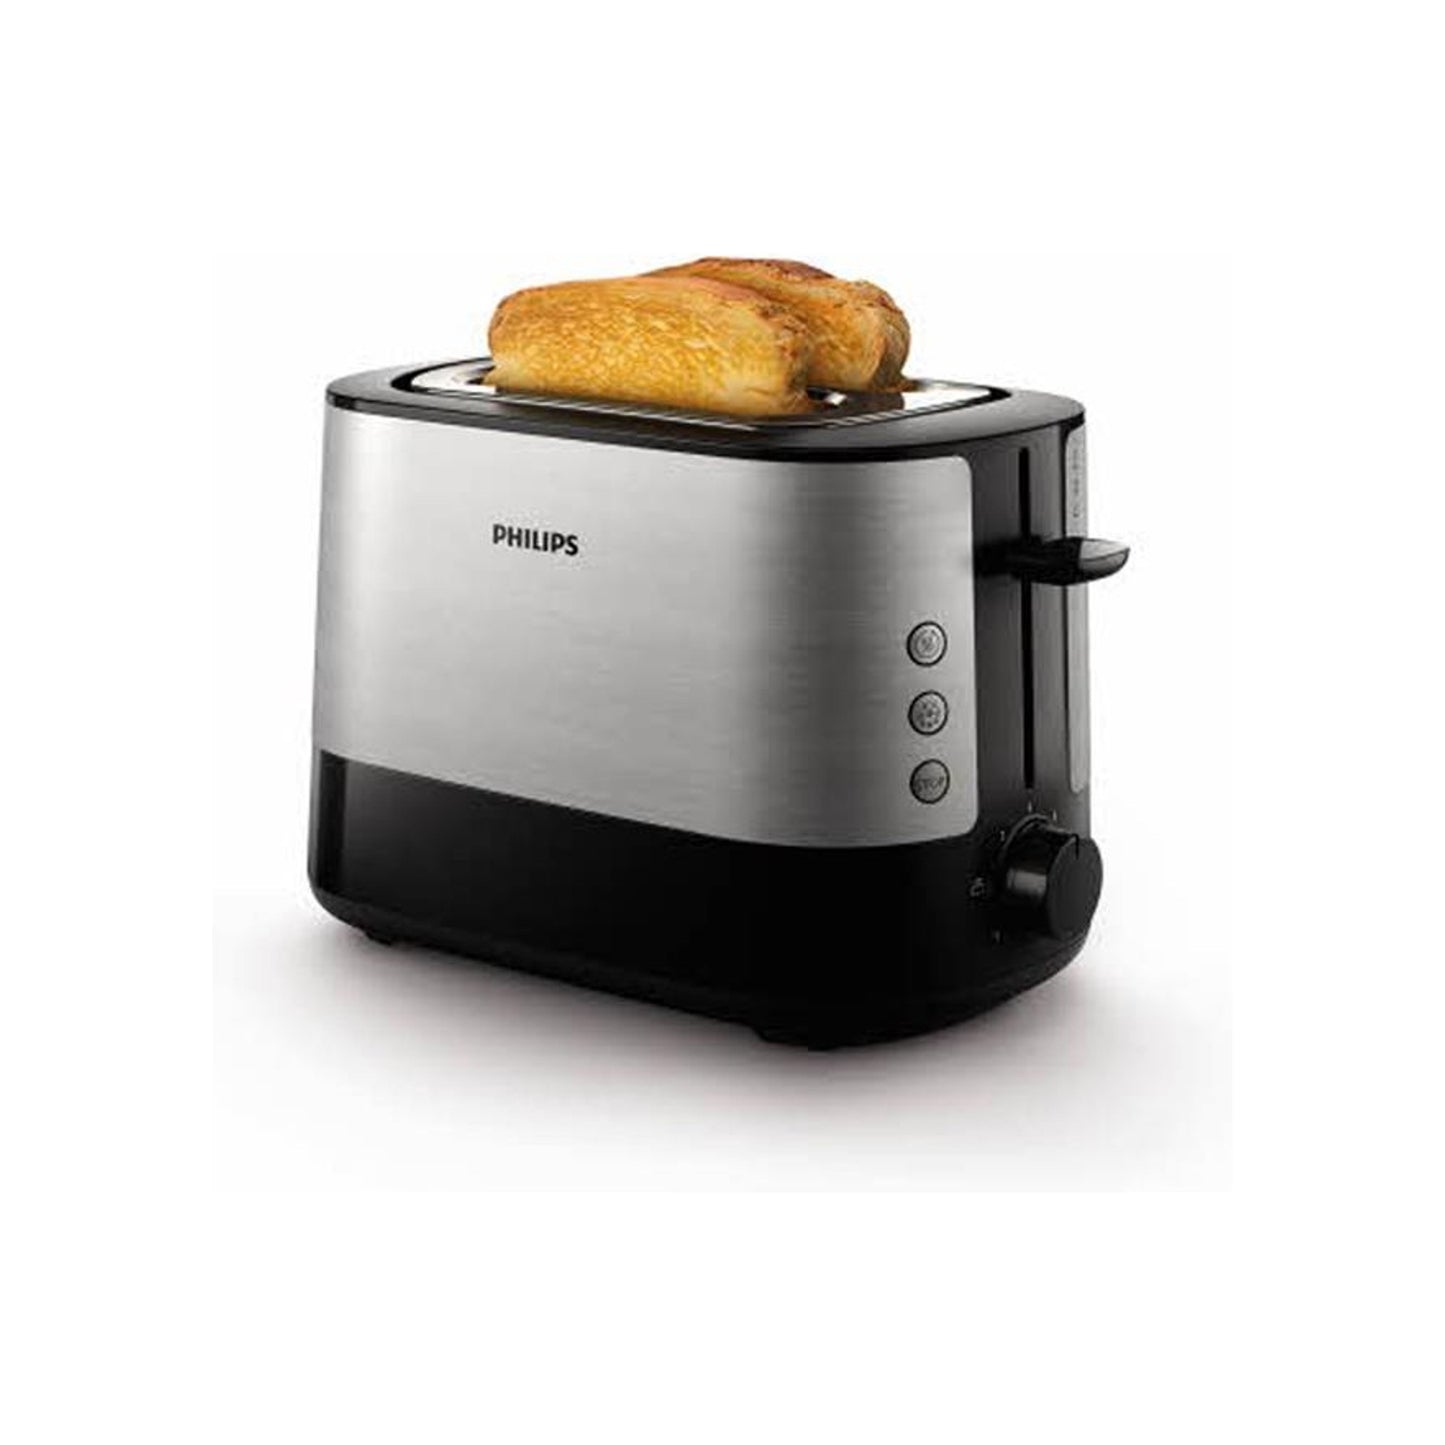 Philips Viva Collection Toaster Black HD2637/91